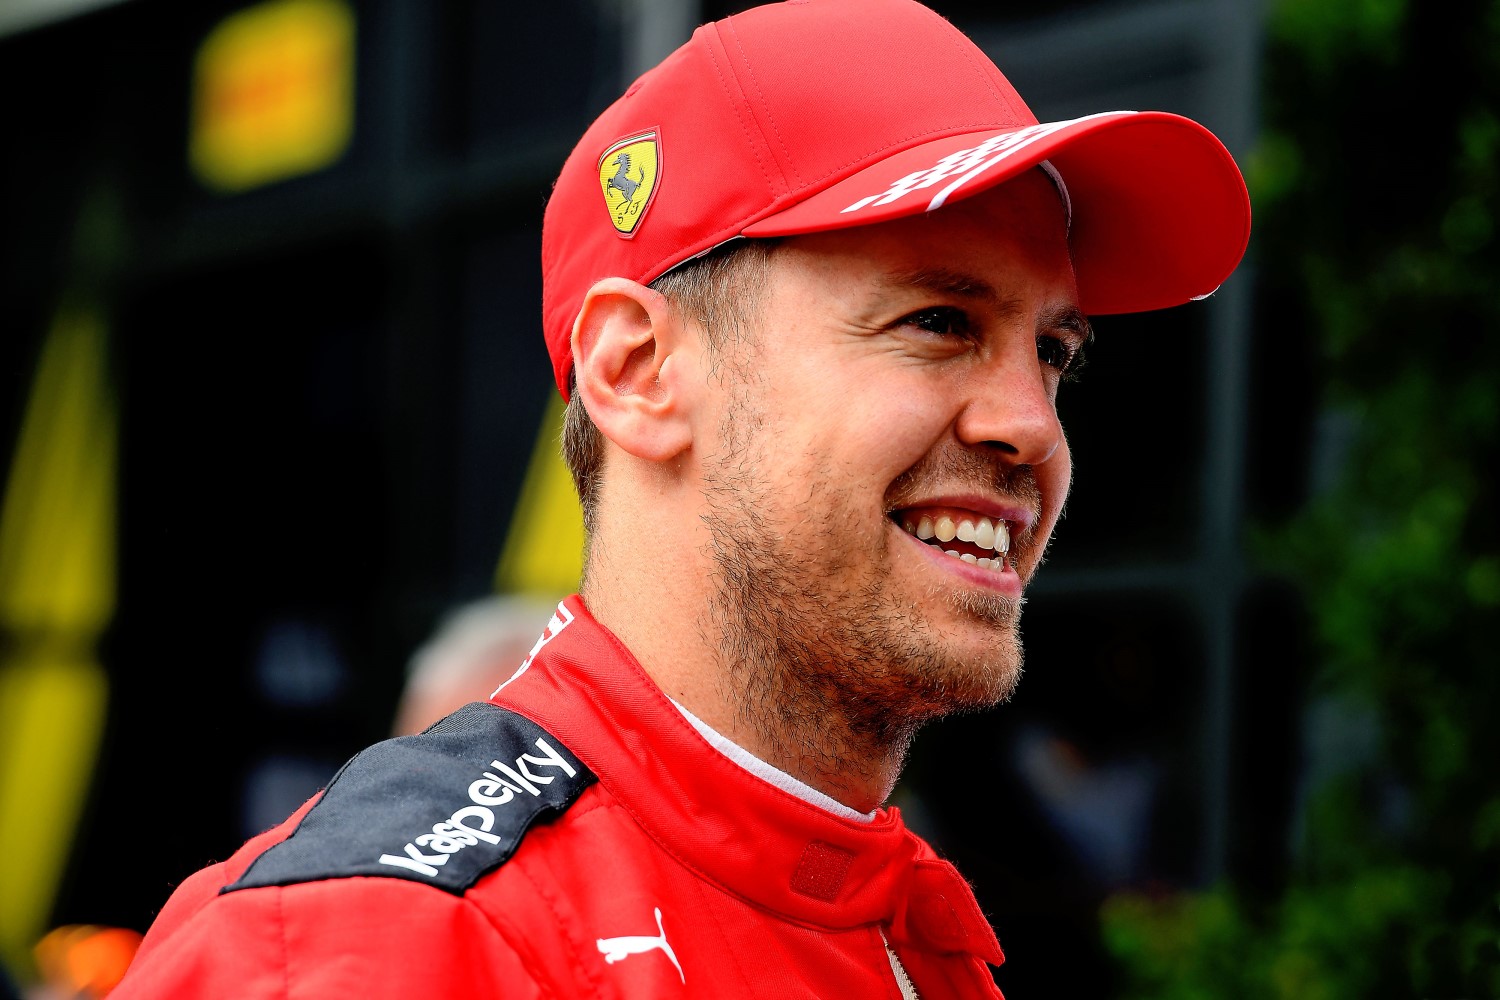 The bias British F1 media do not want Vettel to land at Mercedes alongside Lewis Hamilton for fear he might beat him and prove it was the car that won all those races